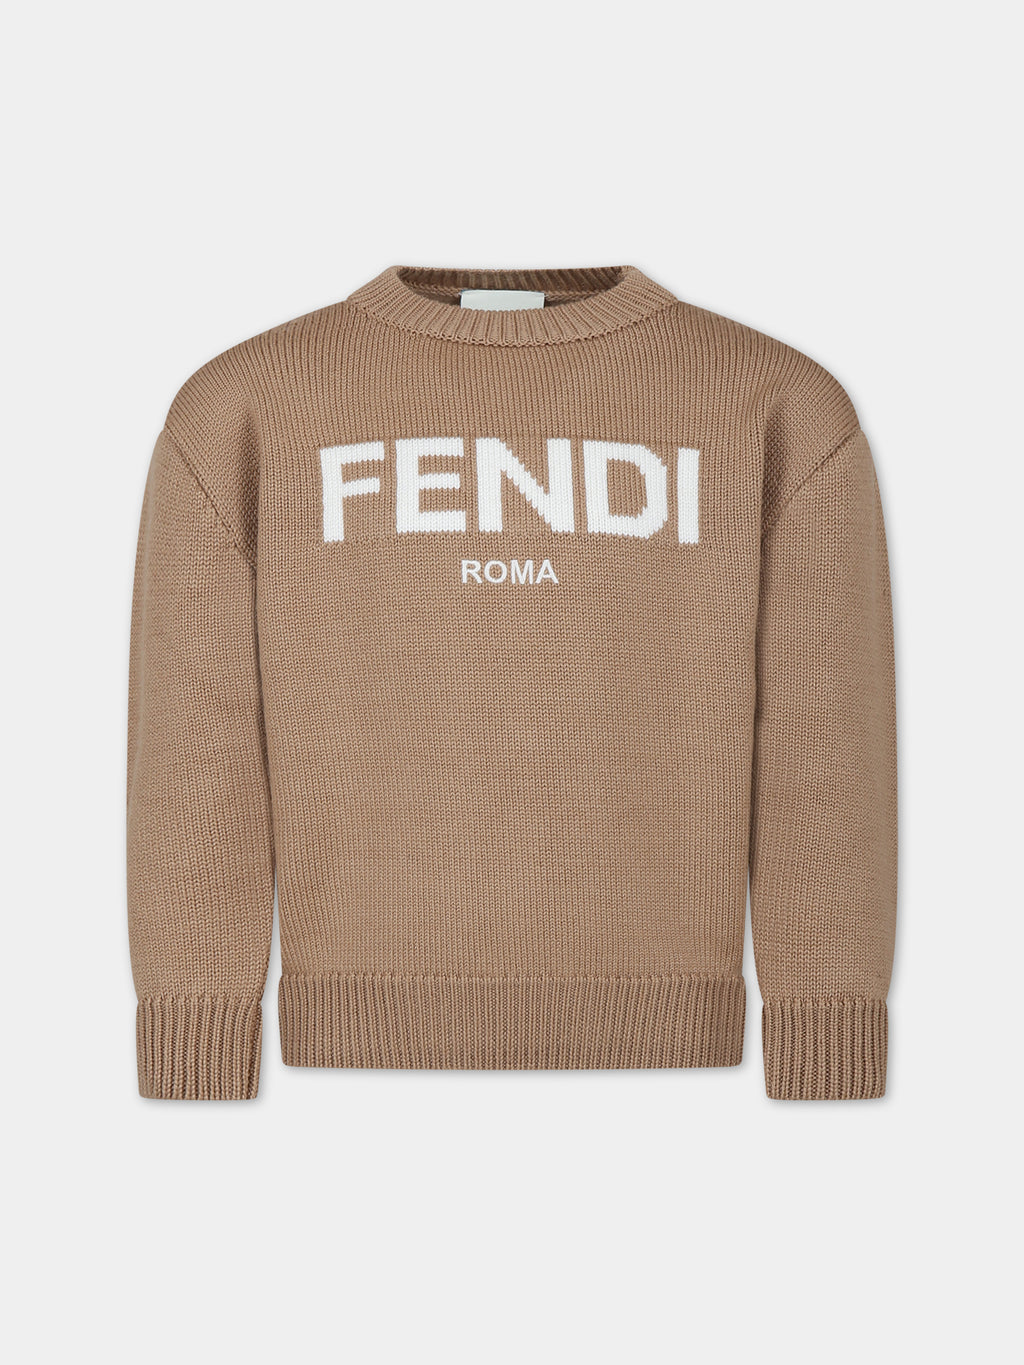 Camel sweater with logo for kids